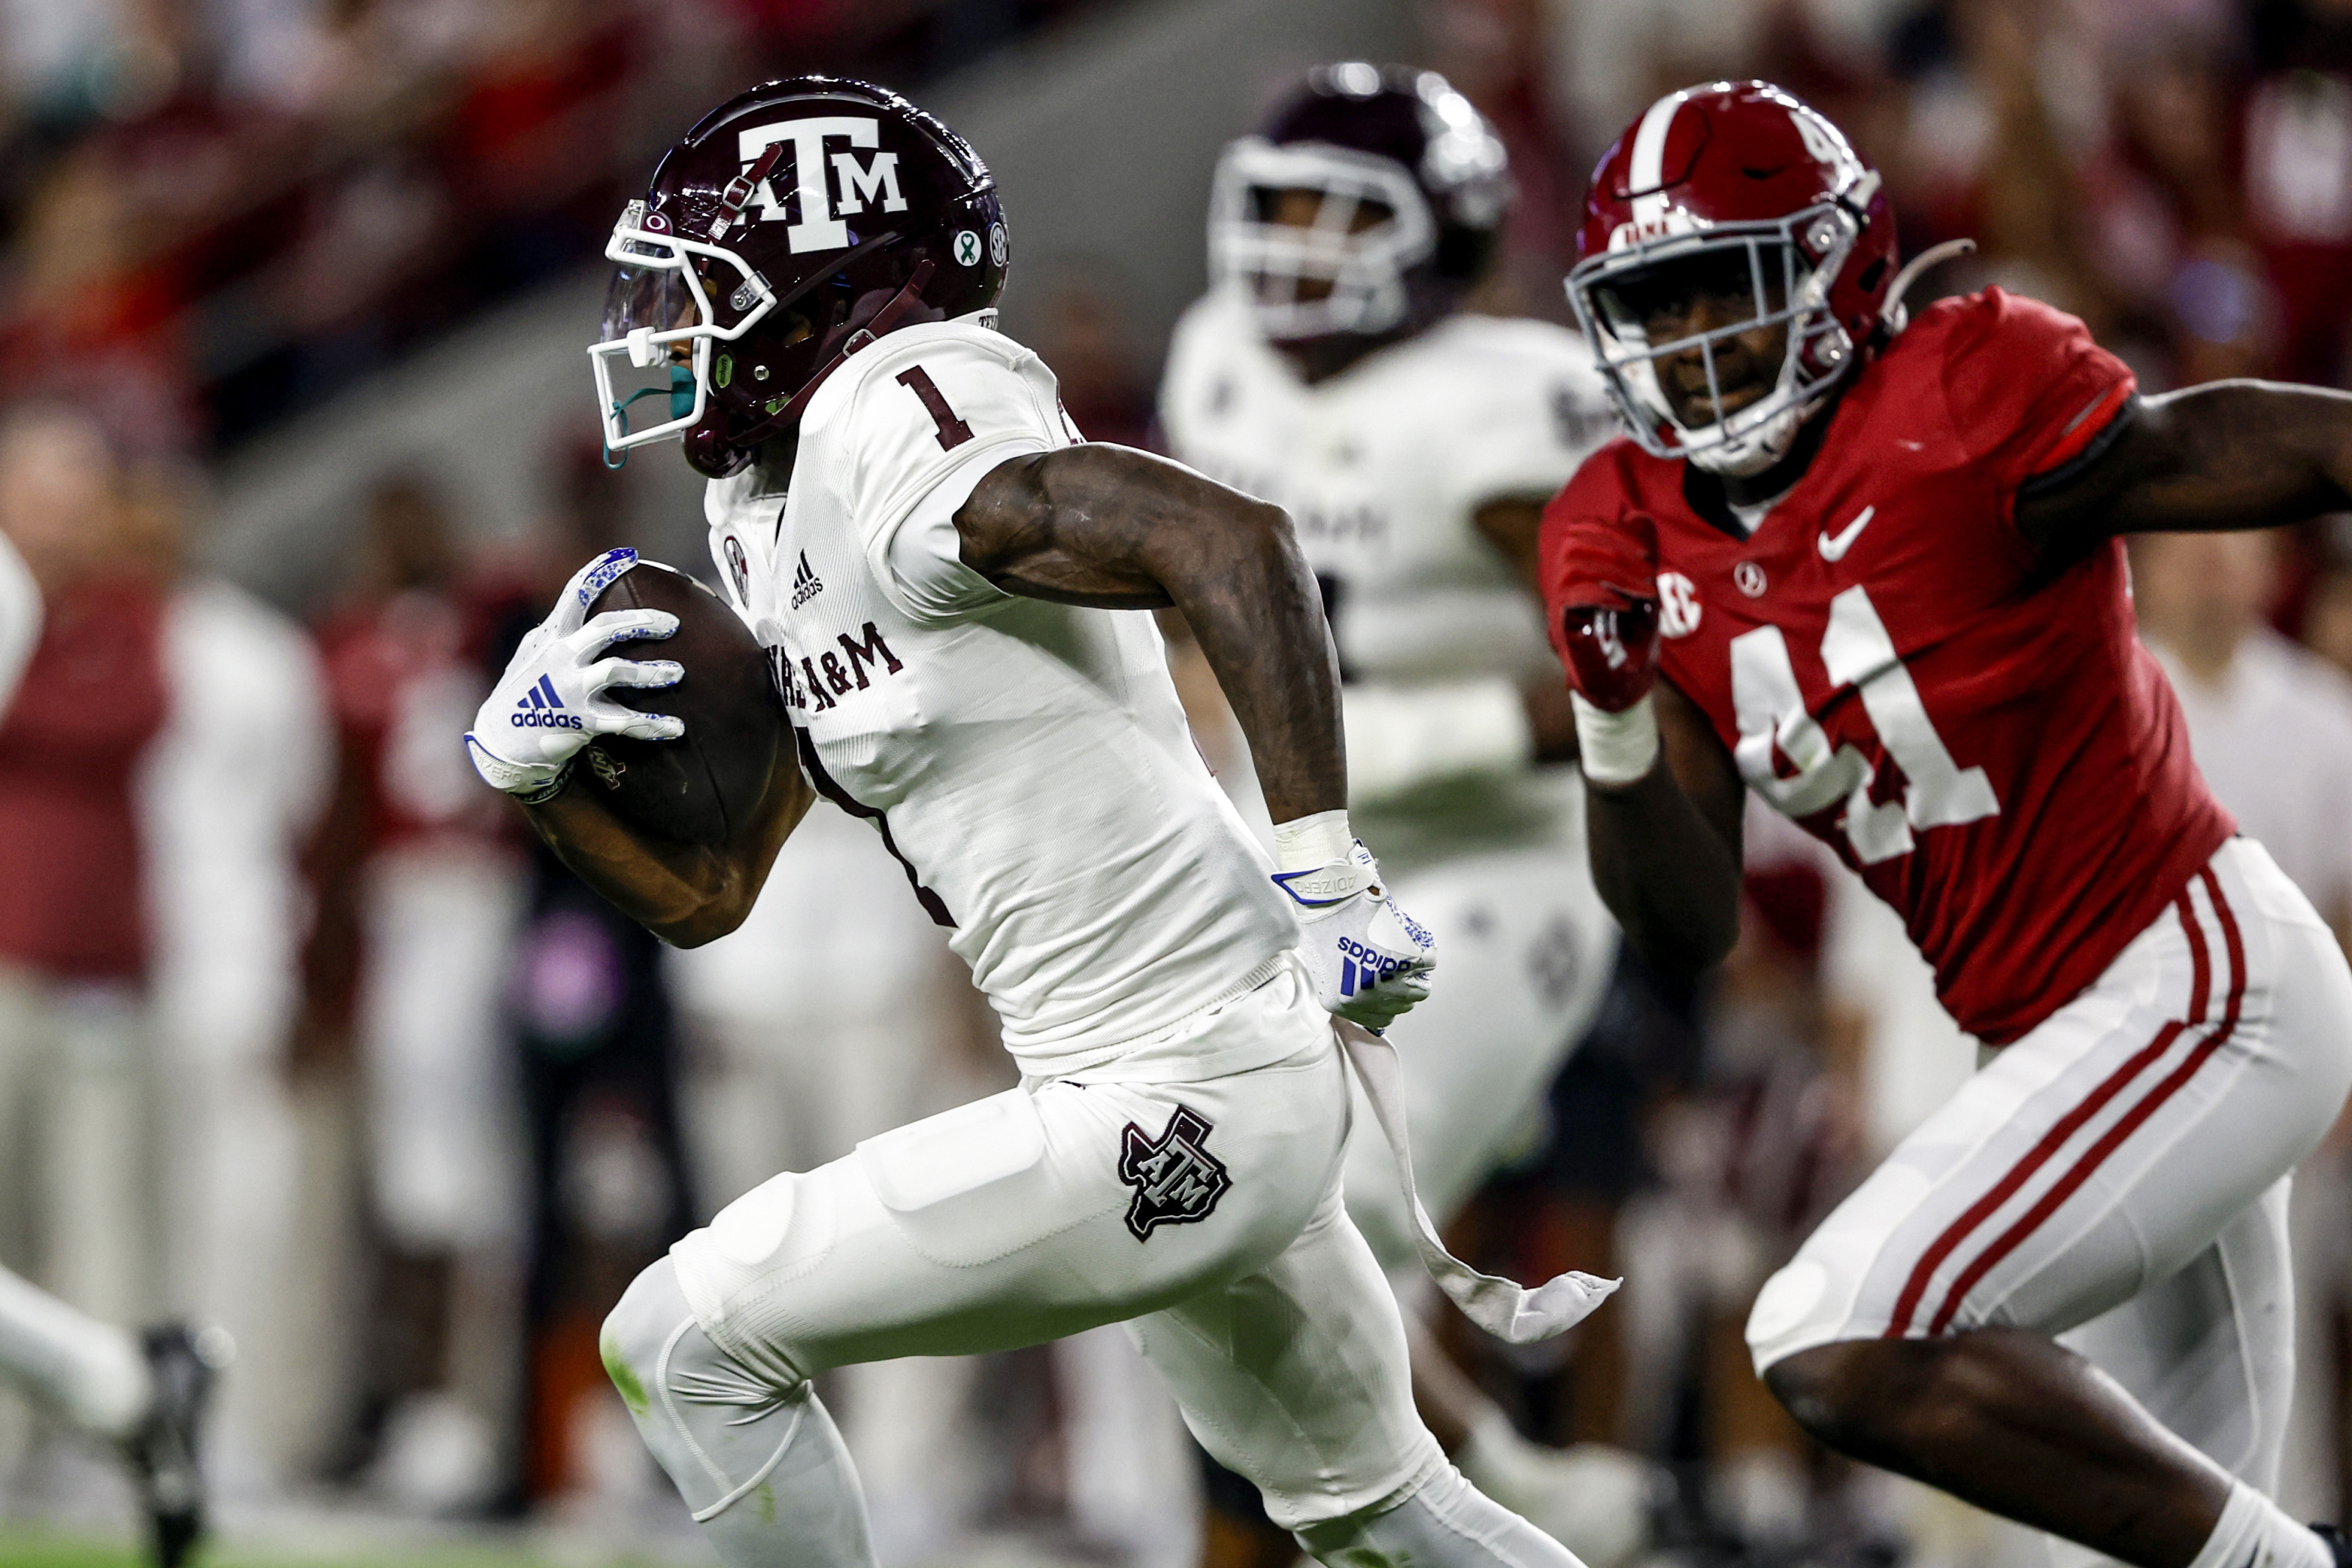 Texas A&M Football: 3 Takeaways after the Ole Miss Loss